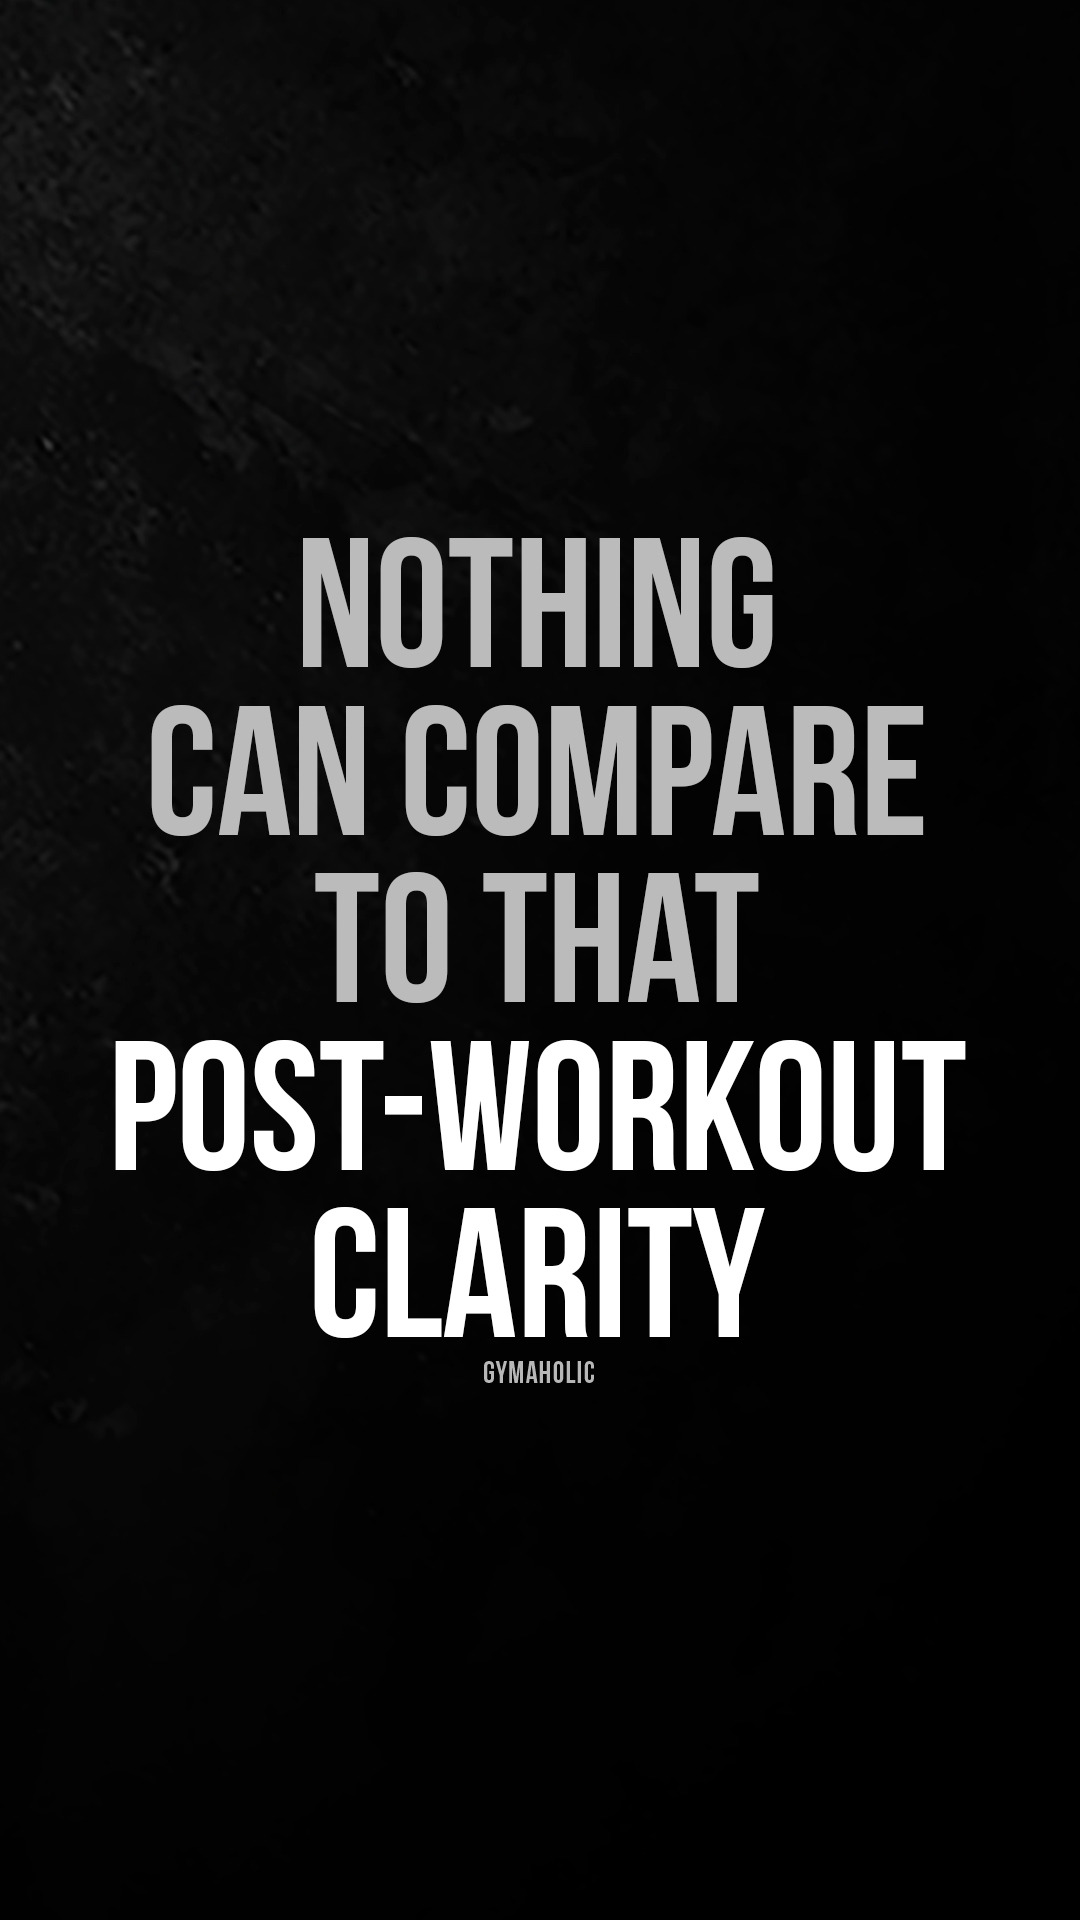 Nothing can compare to that post-workout clarity